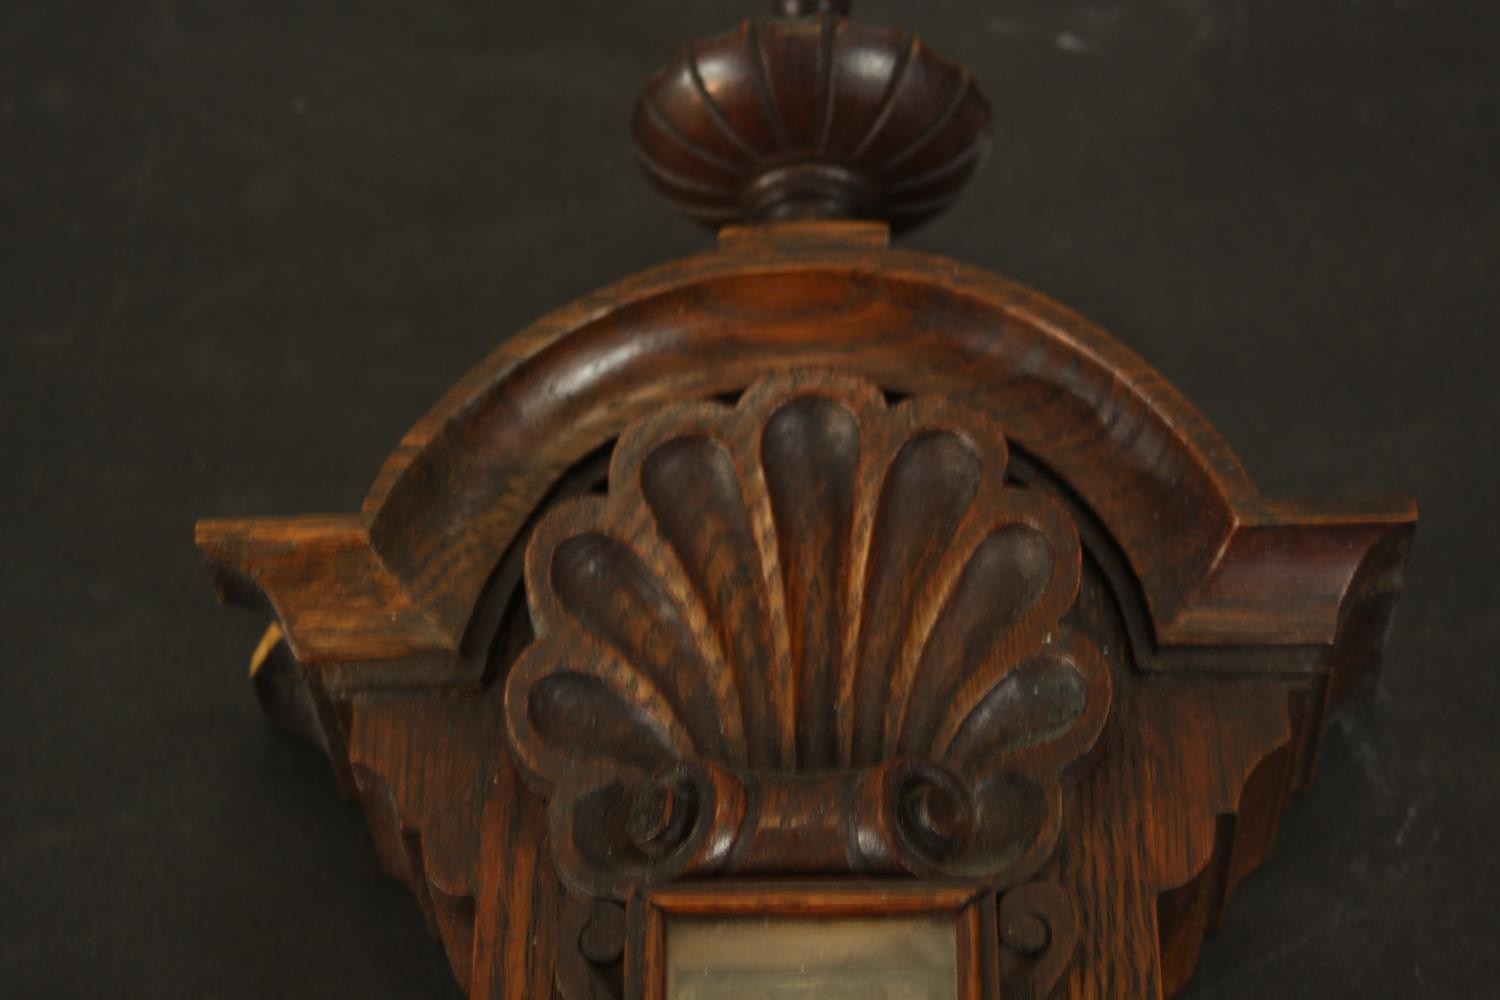 A circa 1900's Negretti & Zamba carved oak barometer and thermometer with shell and flower motifs. - Image 7 of 7